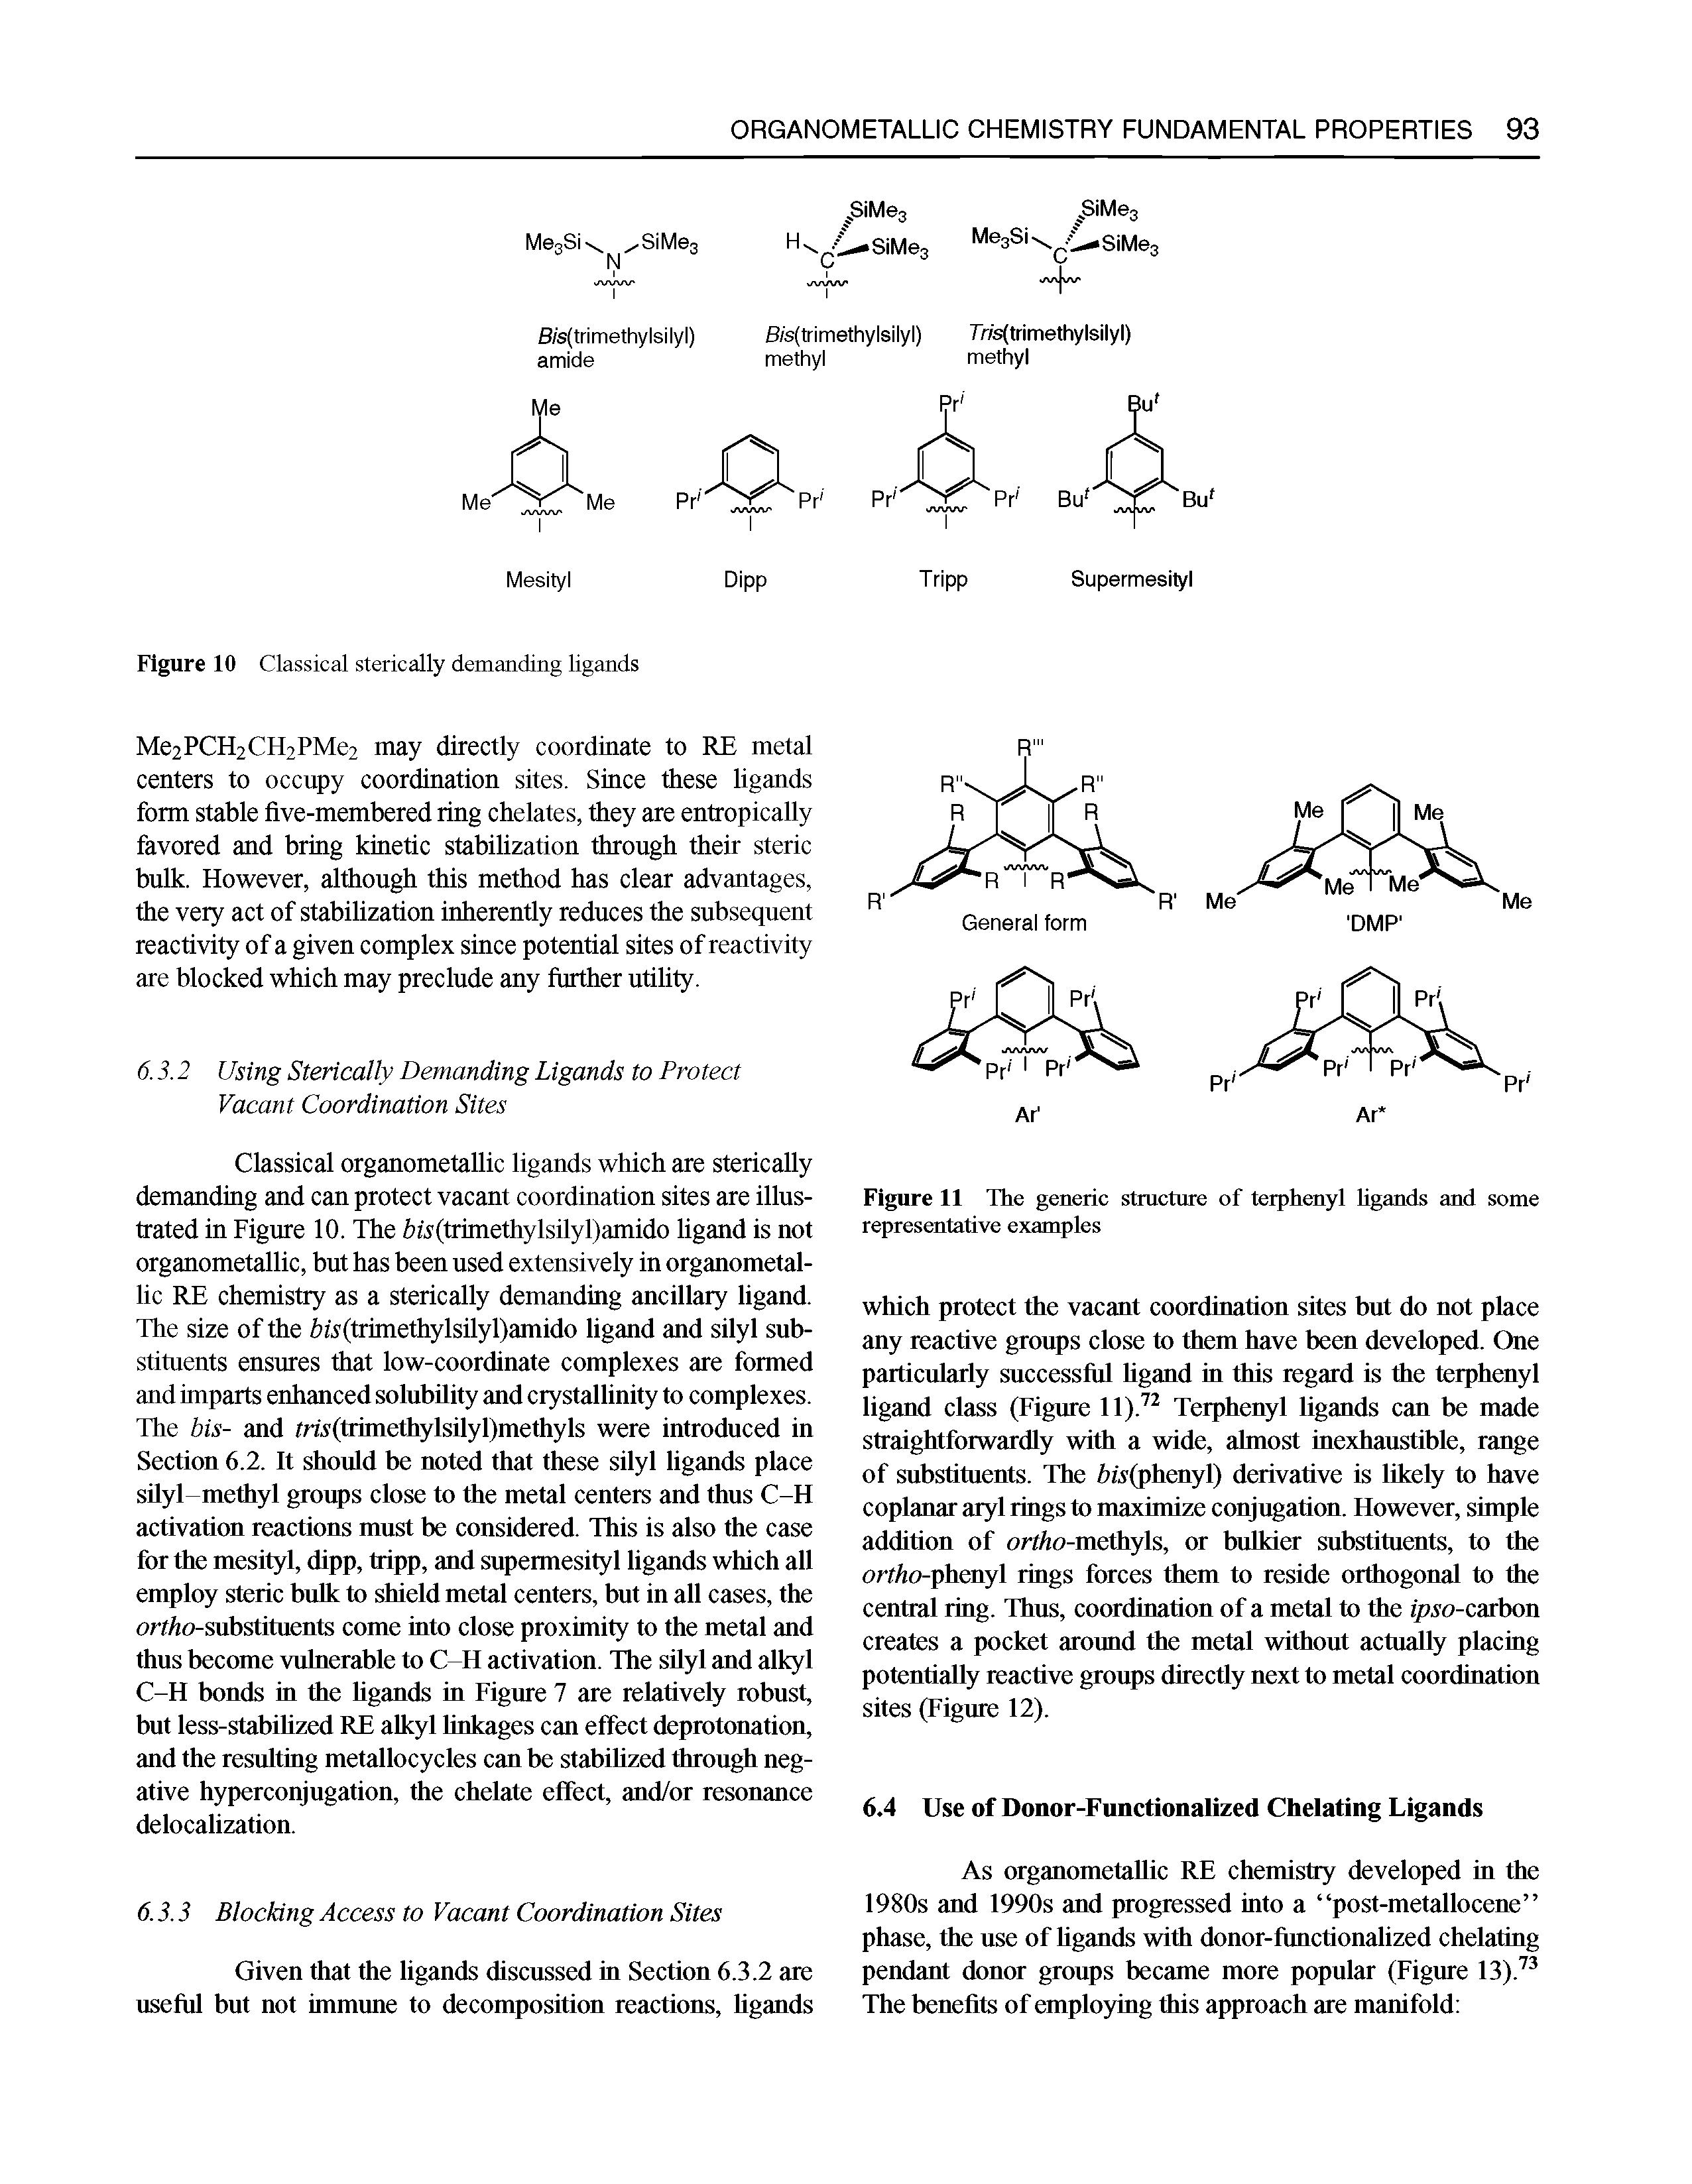 Figure 11 The generic structure of terphenyl Ugands and some representative examples...